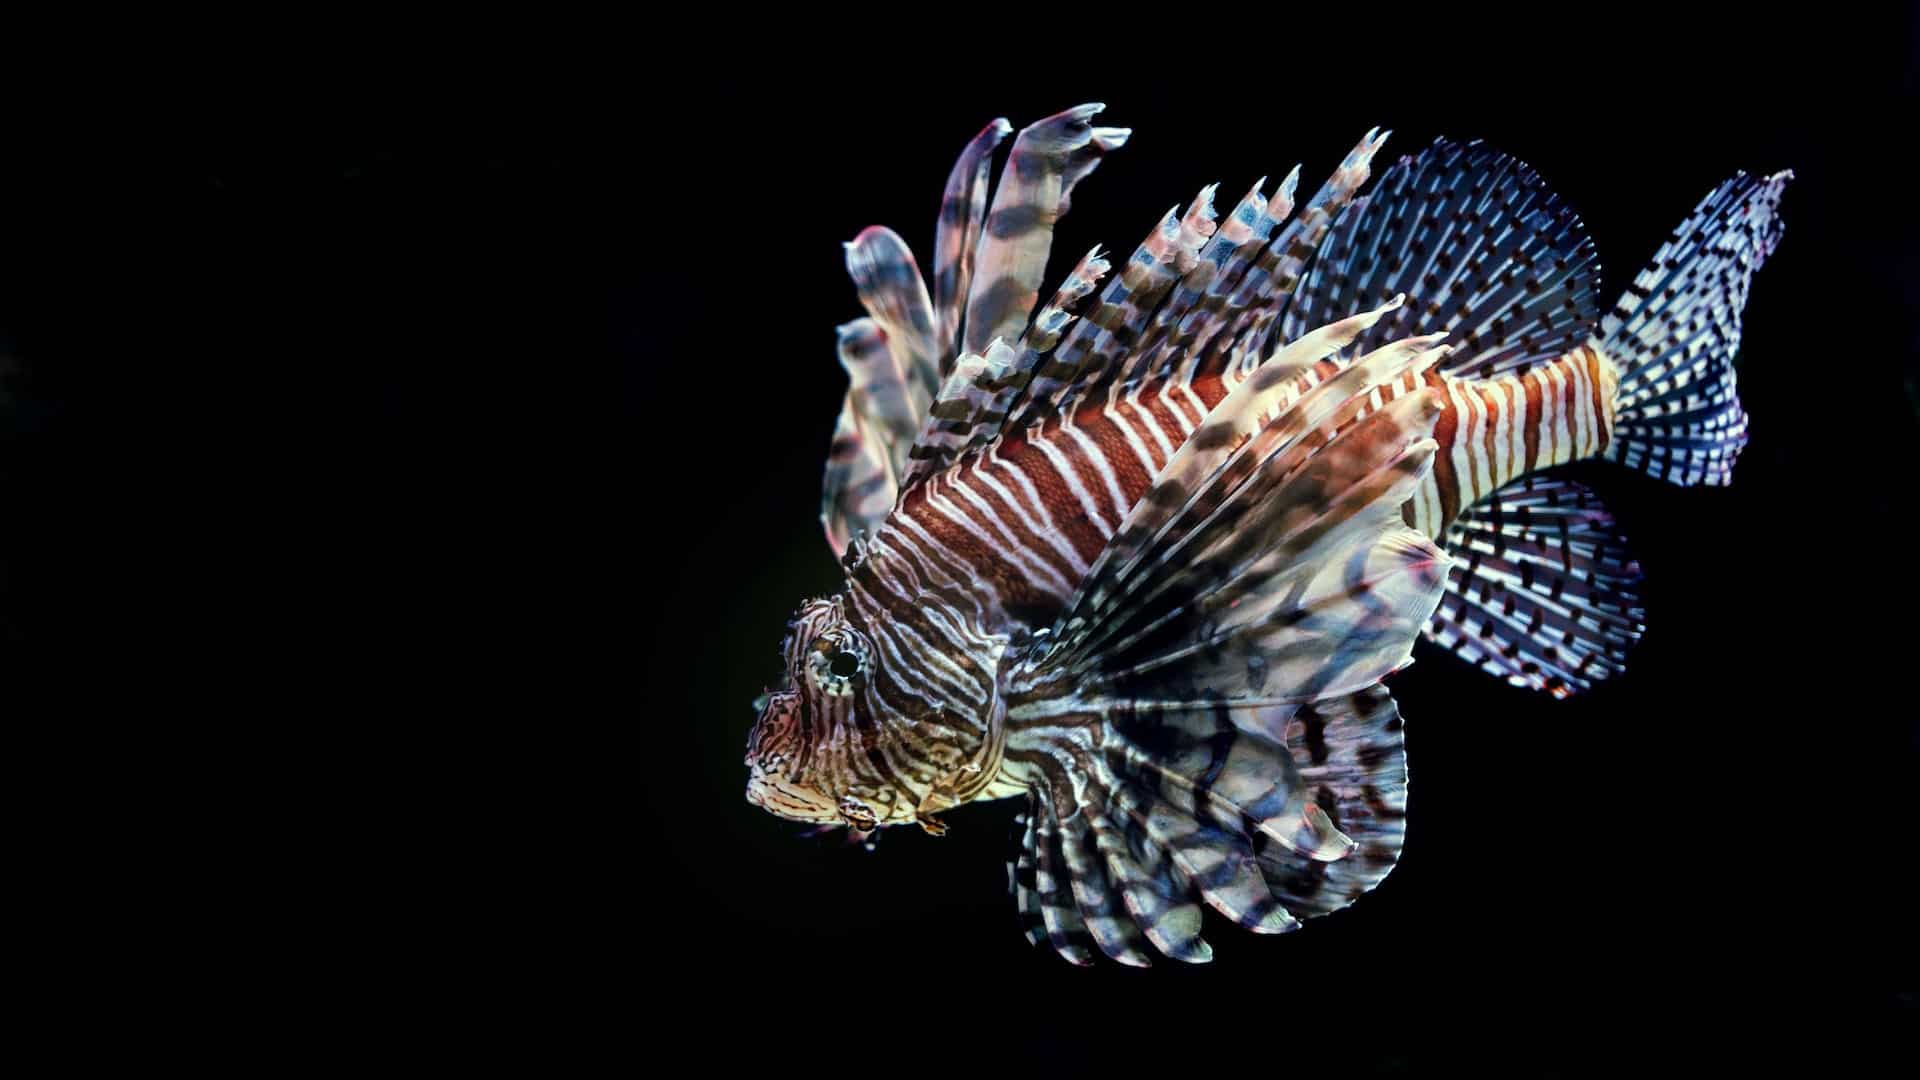 a lionfish, covered in stripes, with large pectoral fines, and spines protruding from its back, floats in the water against a black background